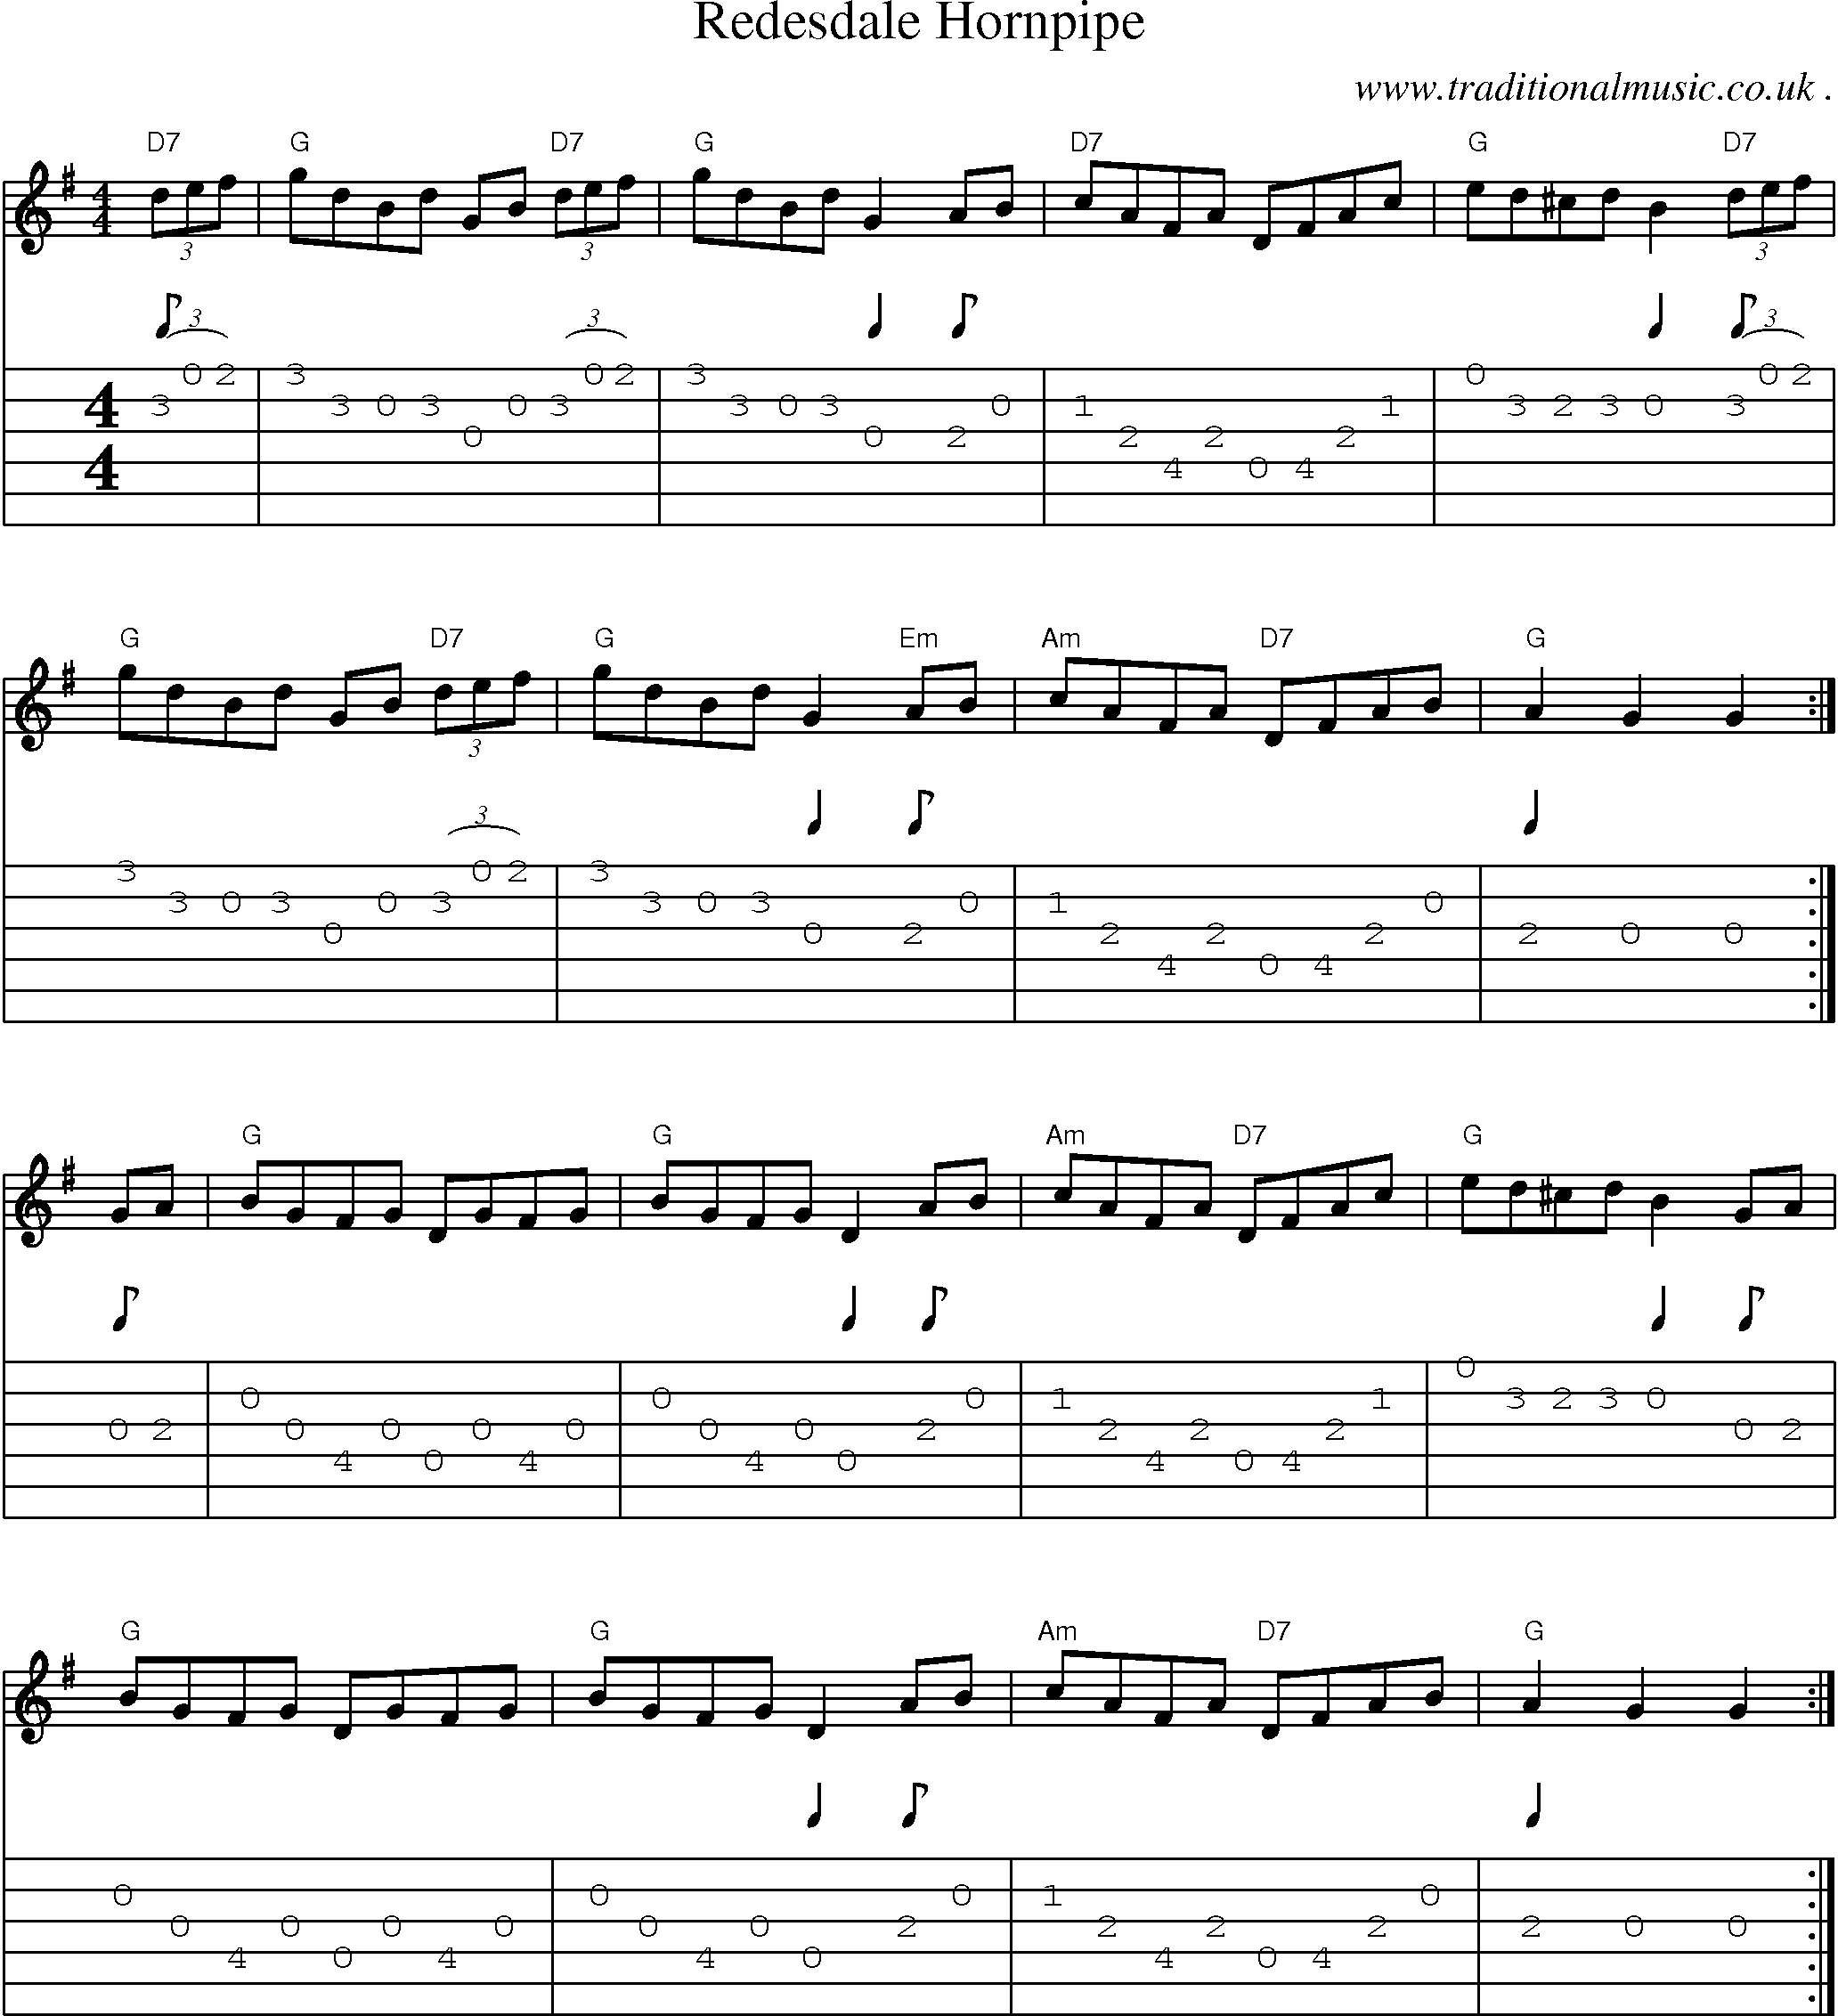 Music Score and Guitar Tabs for Redesdale Hornpipe